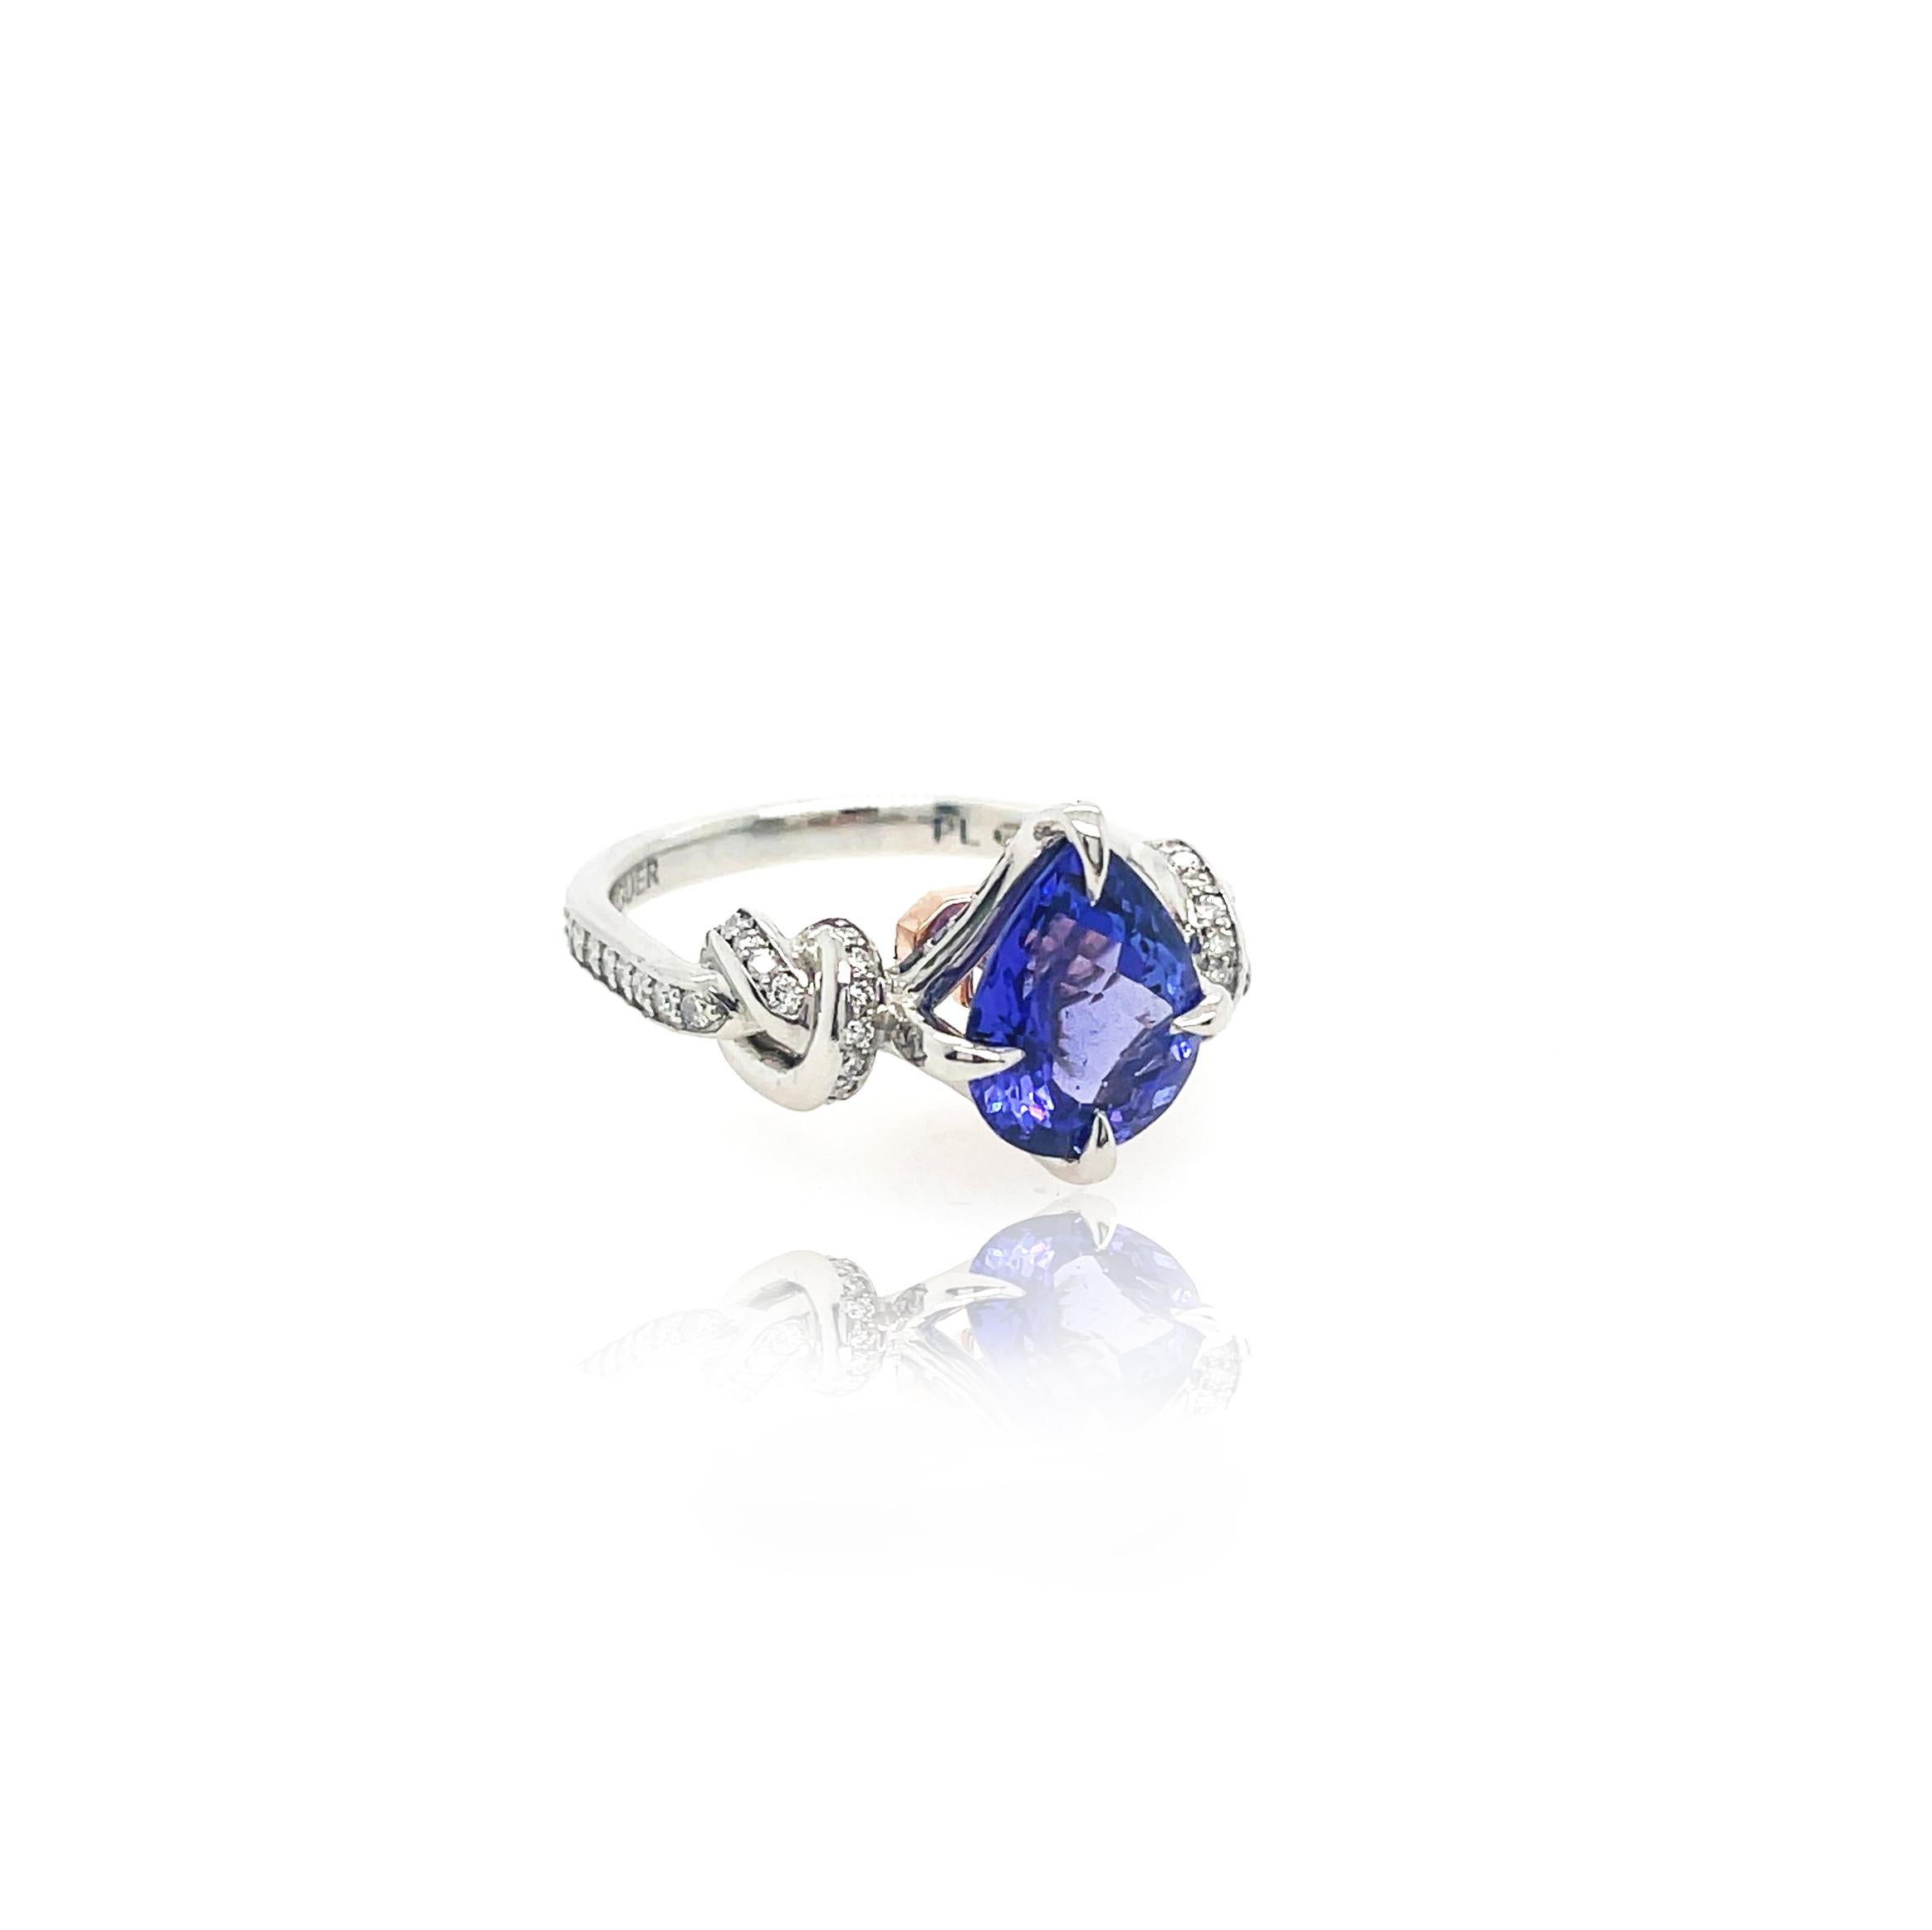 For Sale:  2ct tanzanite and diamond ring in platinum and rose gold  Forget me knot ring  2